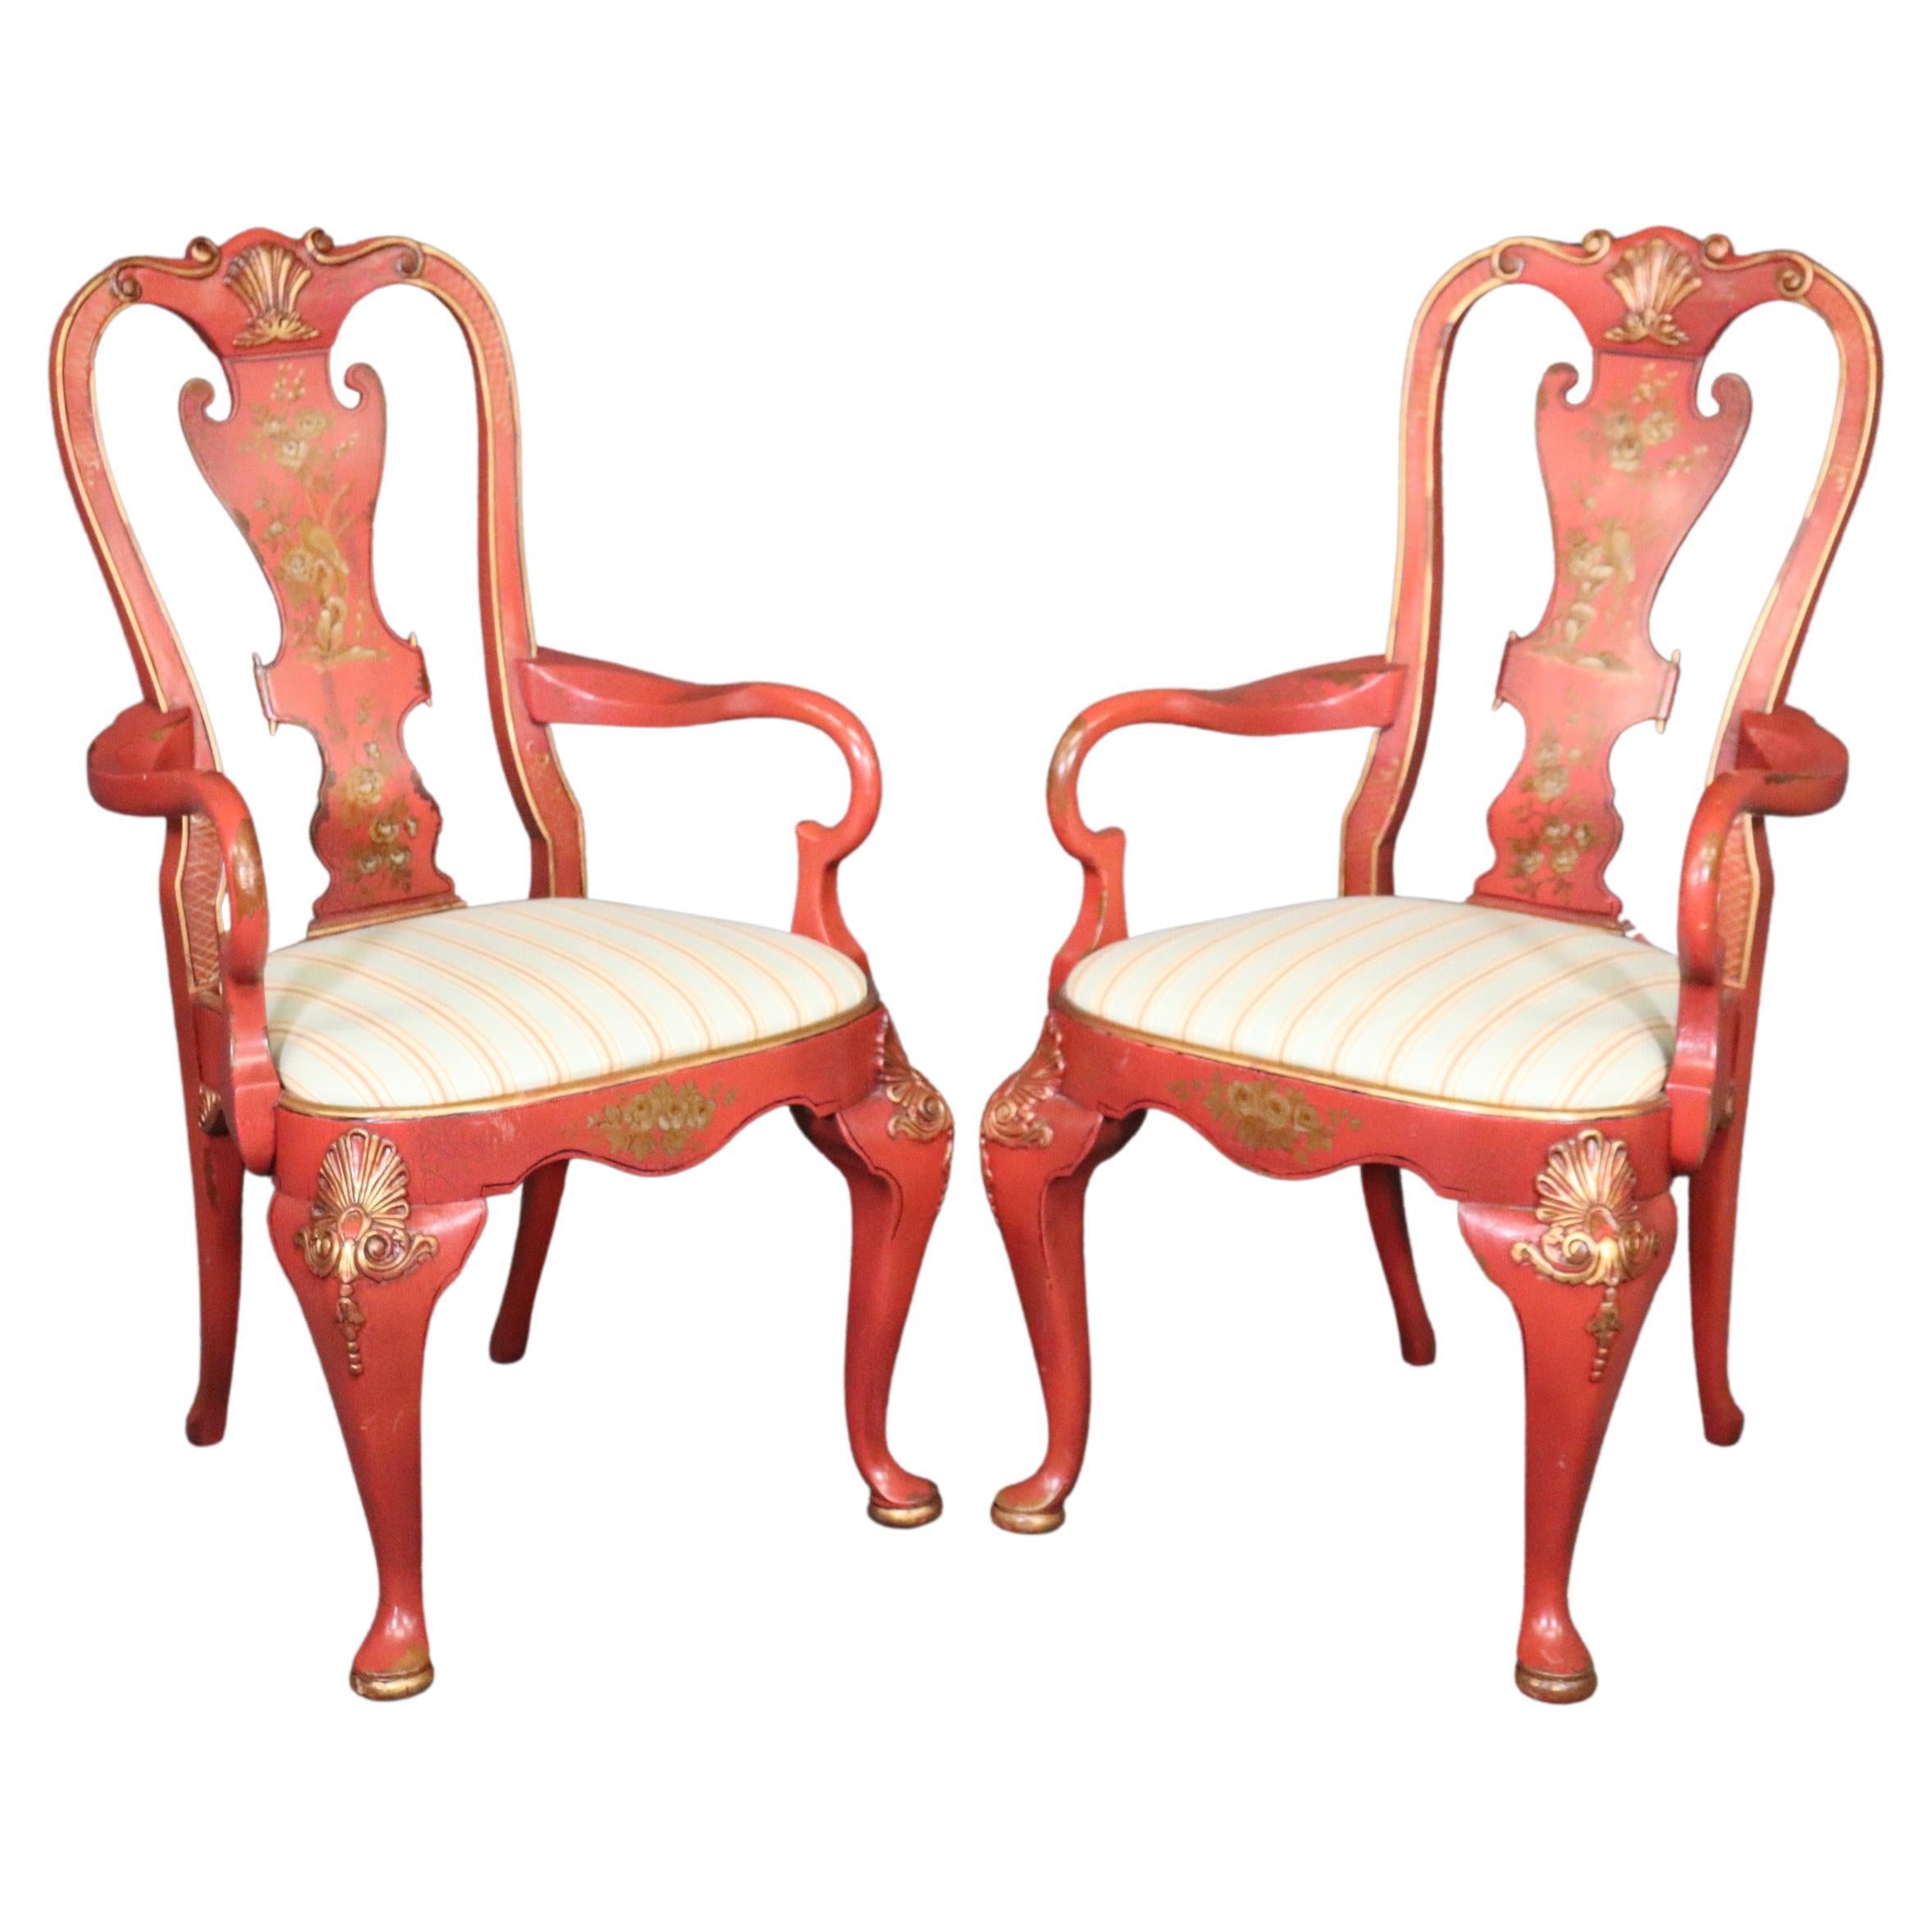 Pair of Red Chinoiserie Paint Decorated Georgian Armchairs or Dining Chairs